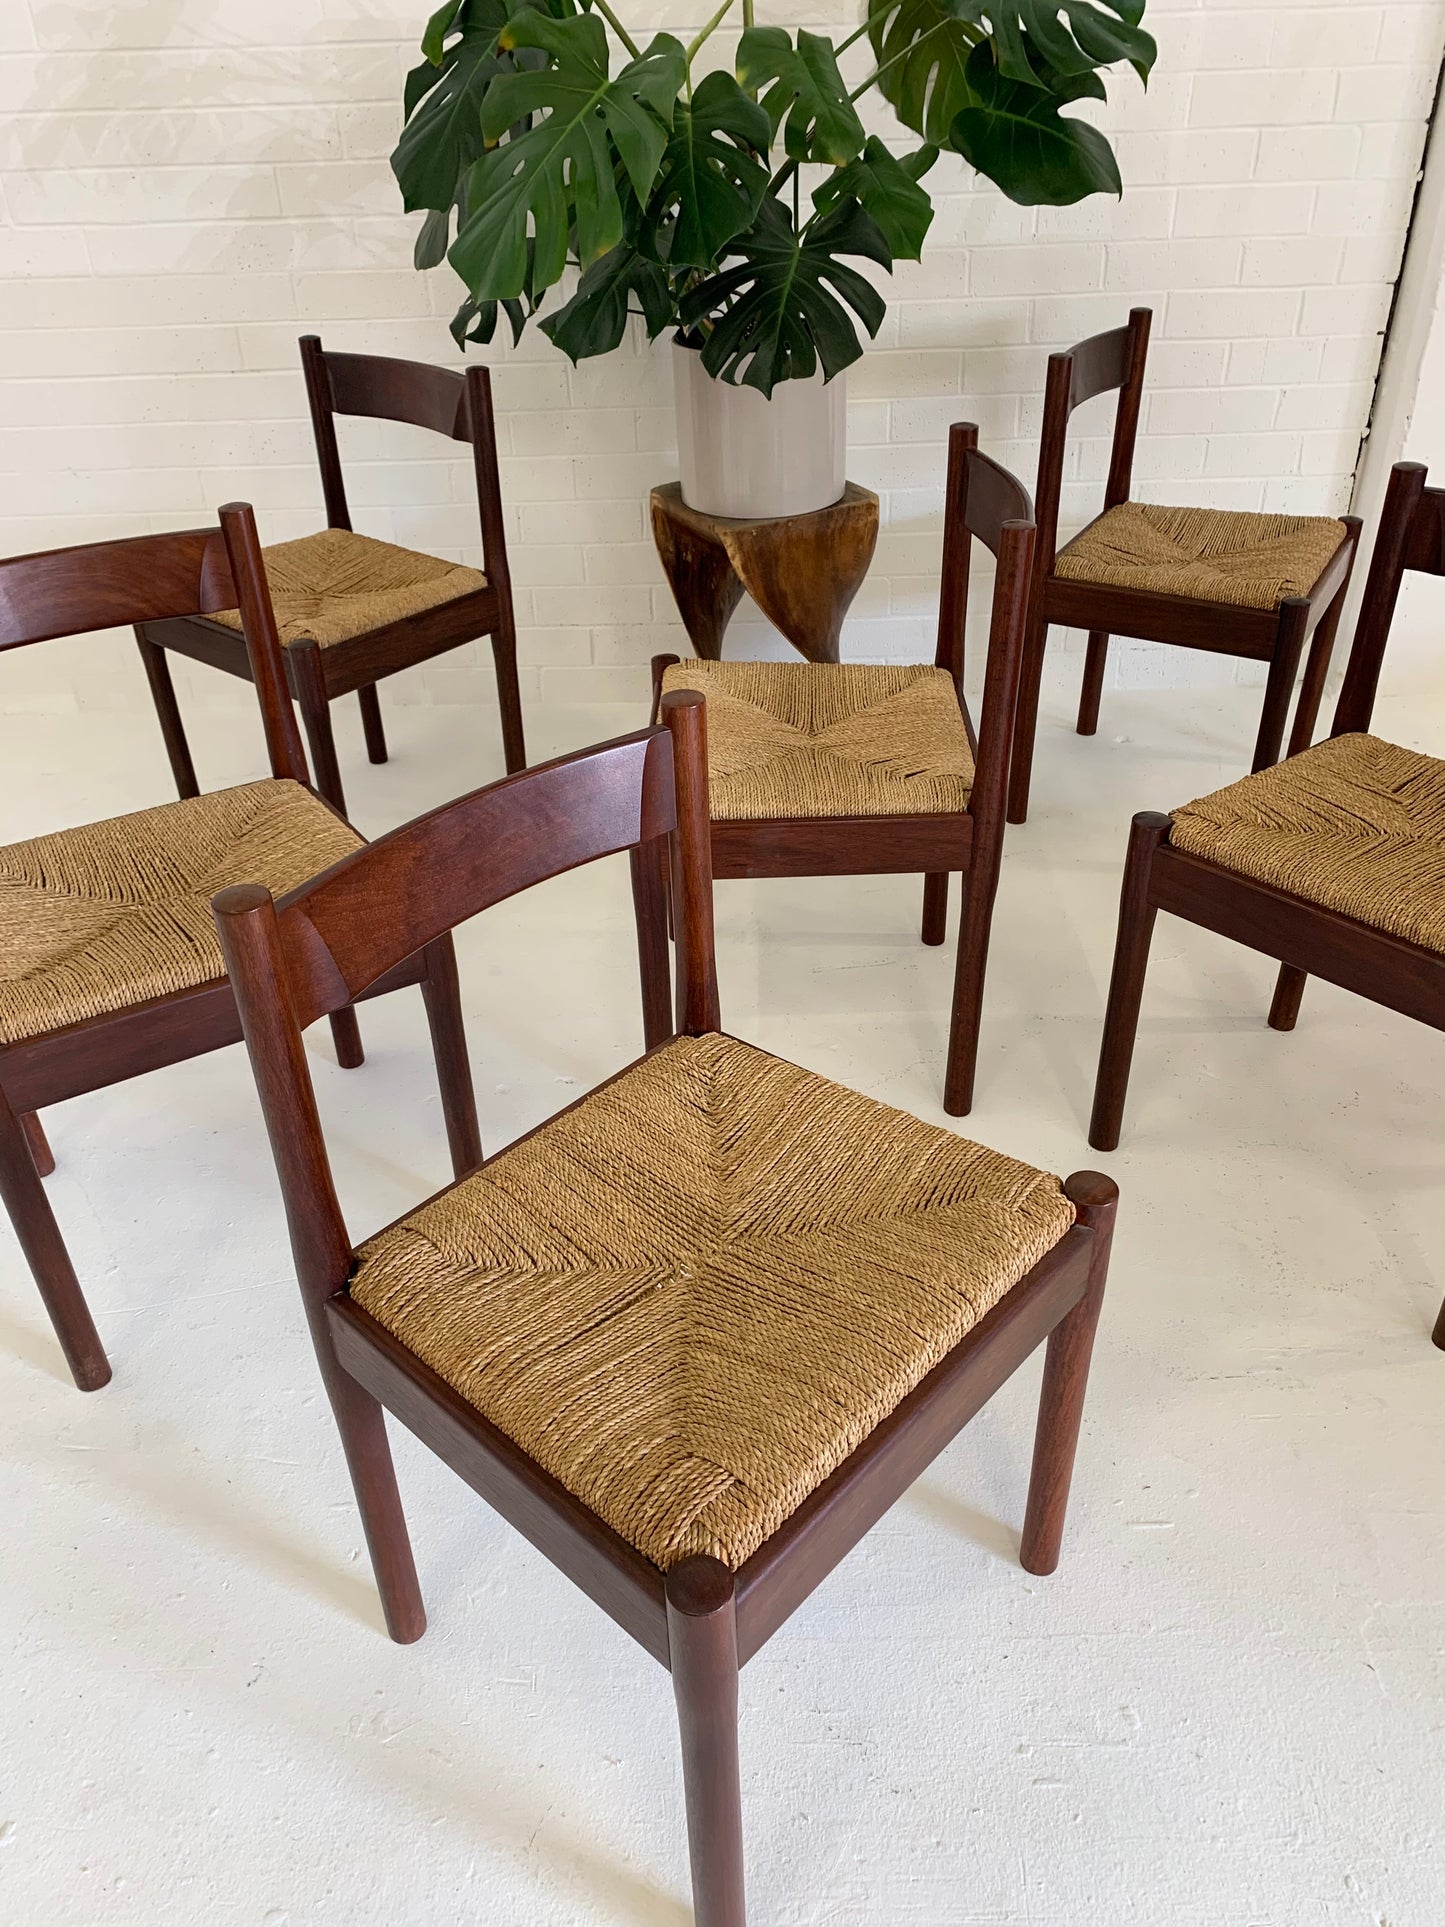 Carimate Dining Chairs in Jarrah